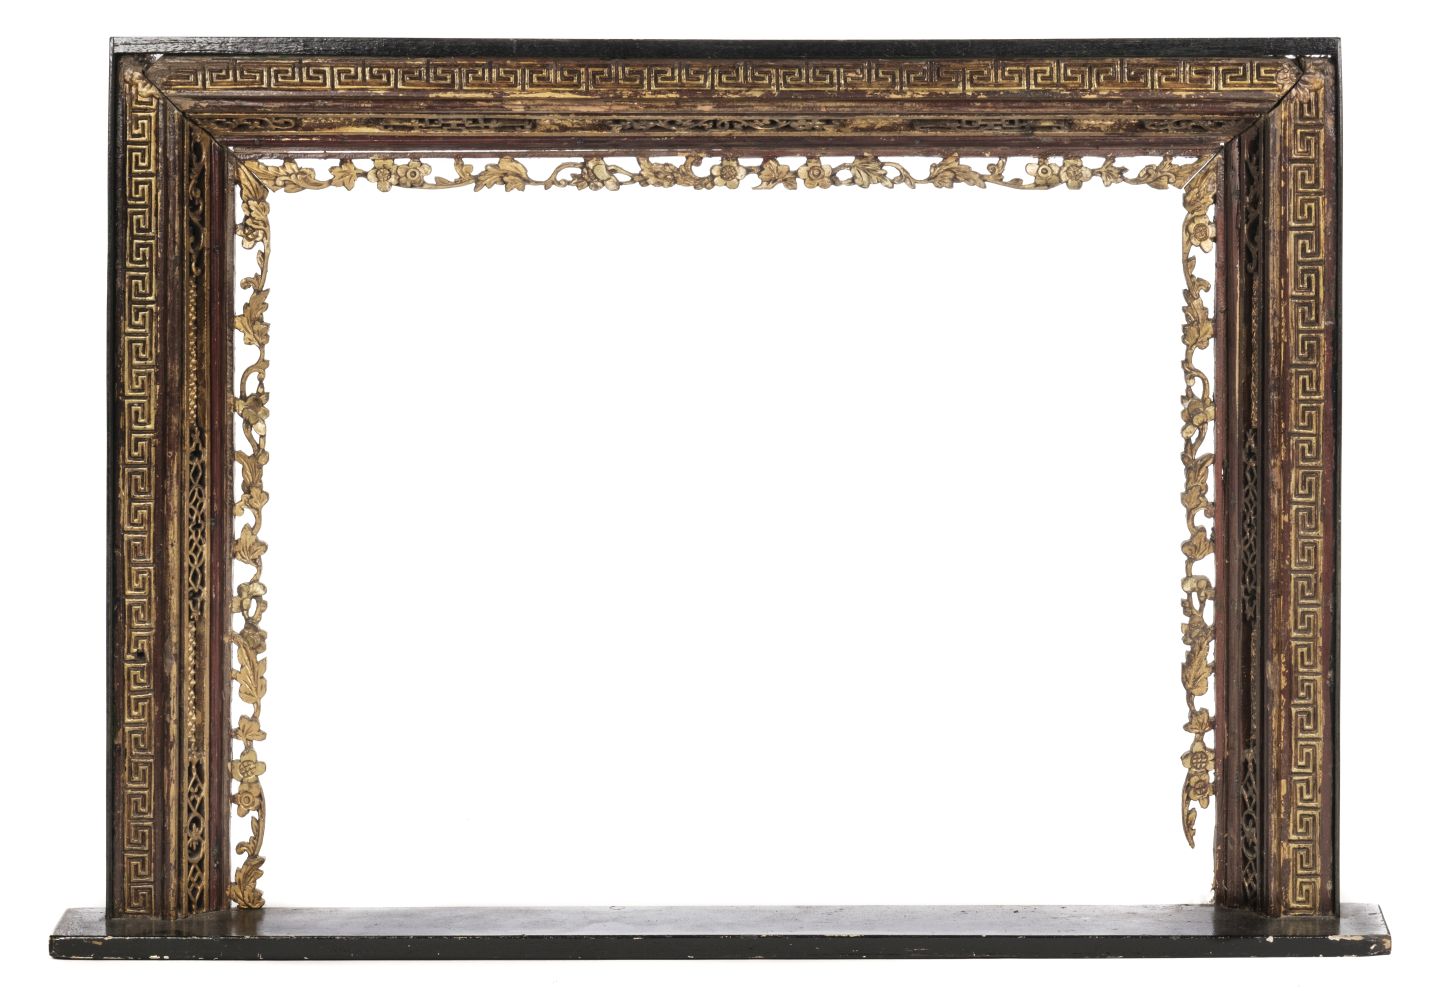 * Frame. 19th-century Anglo-Chinese frame